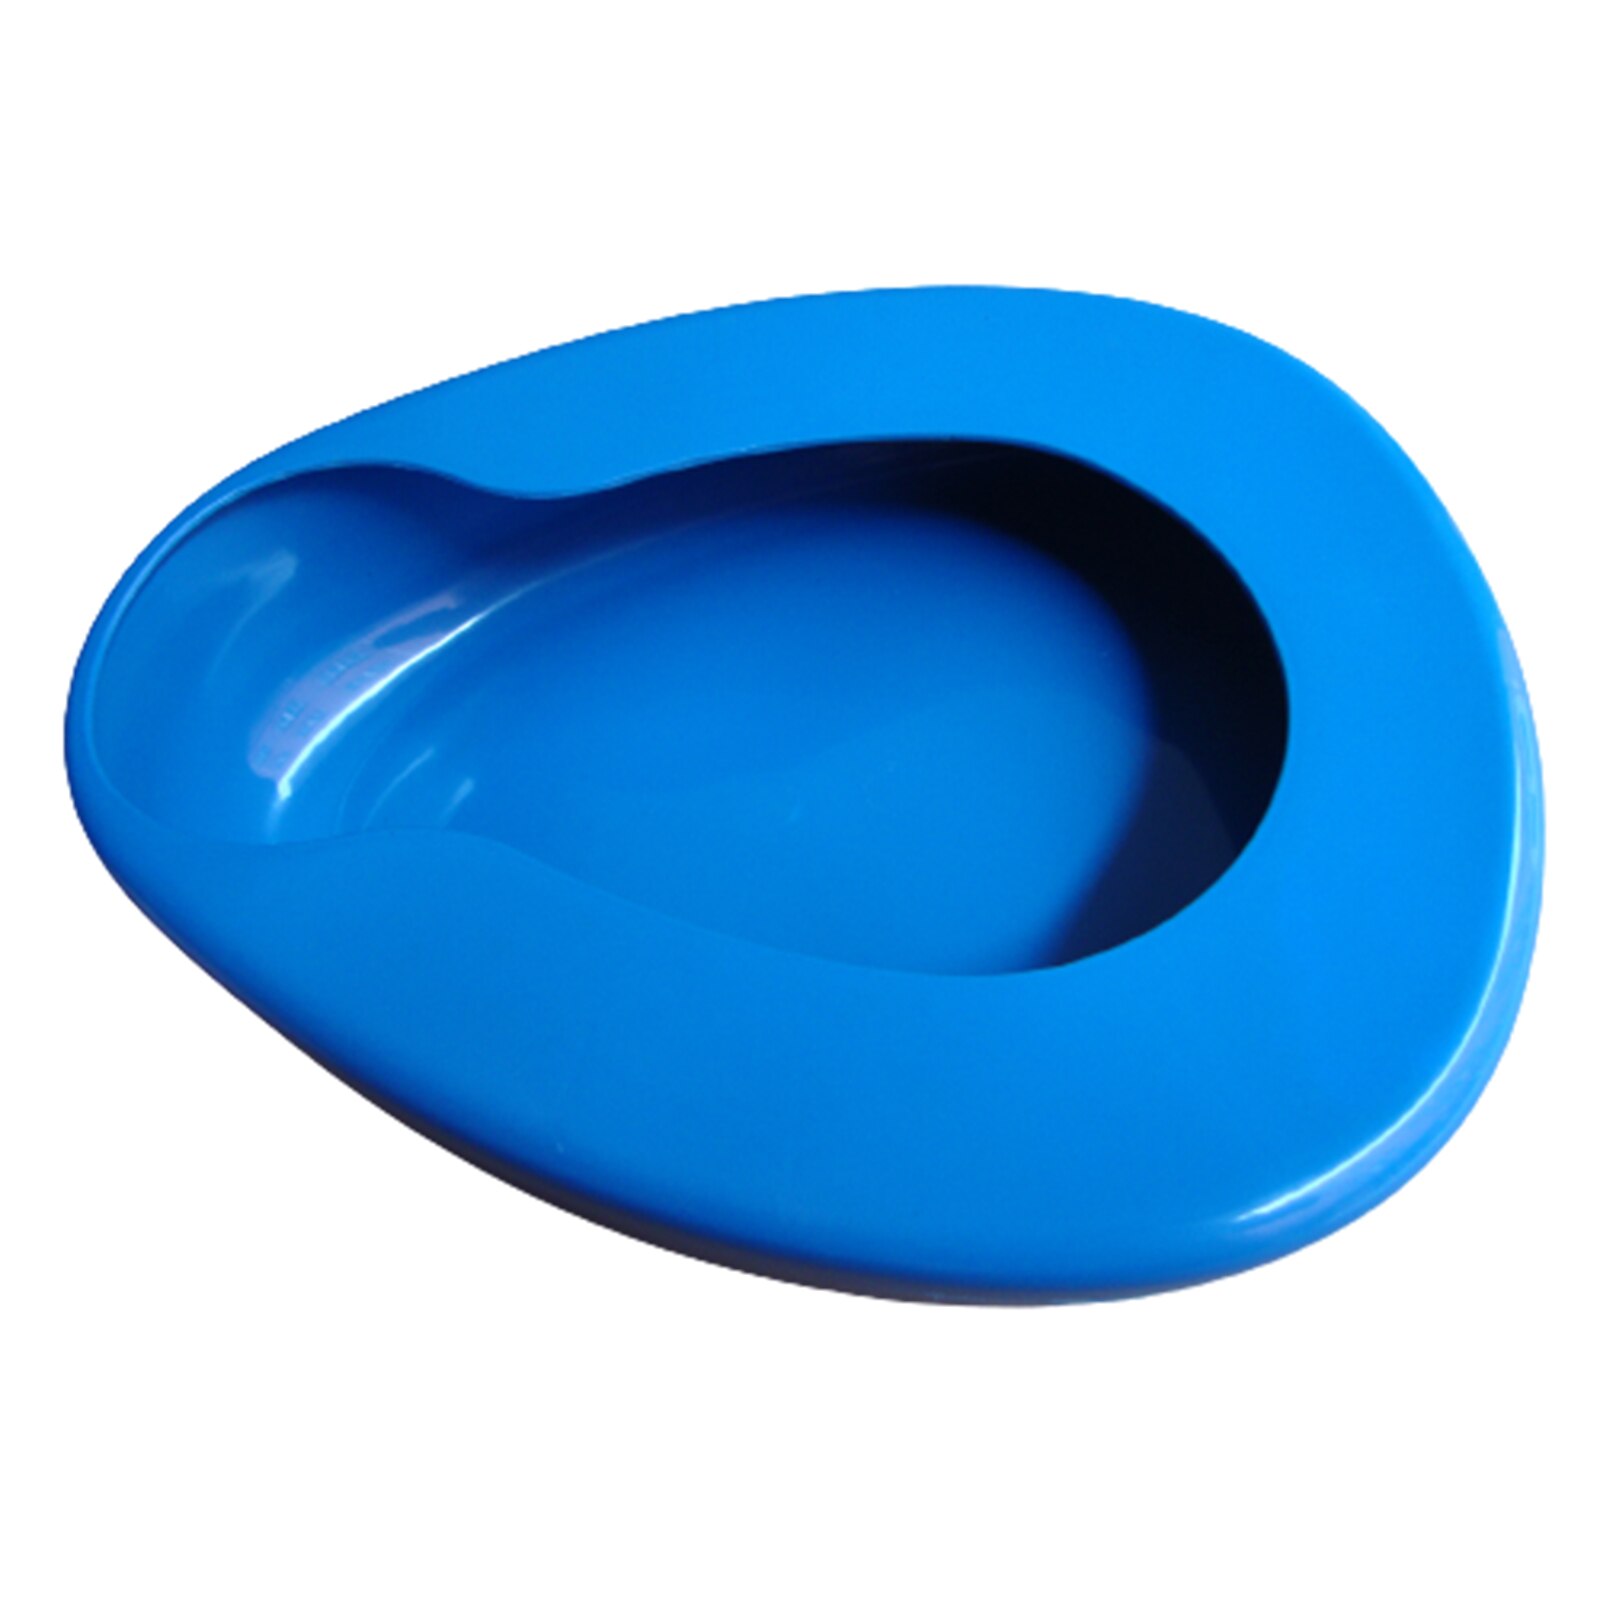 Anti-Spill Blue Bedpan Seat Urinal for Bedridden Patient Elderly Care,Reusable Easy to Clean Patient Home Bed Pan